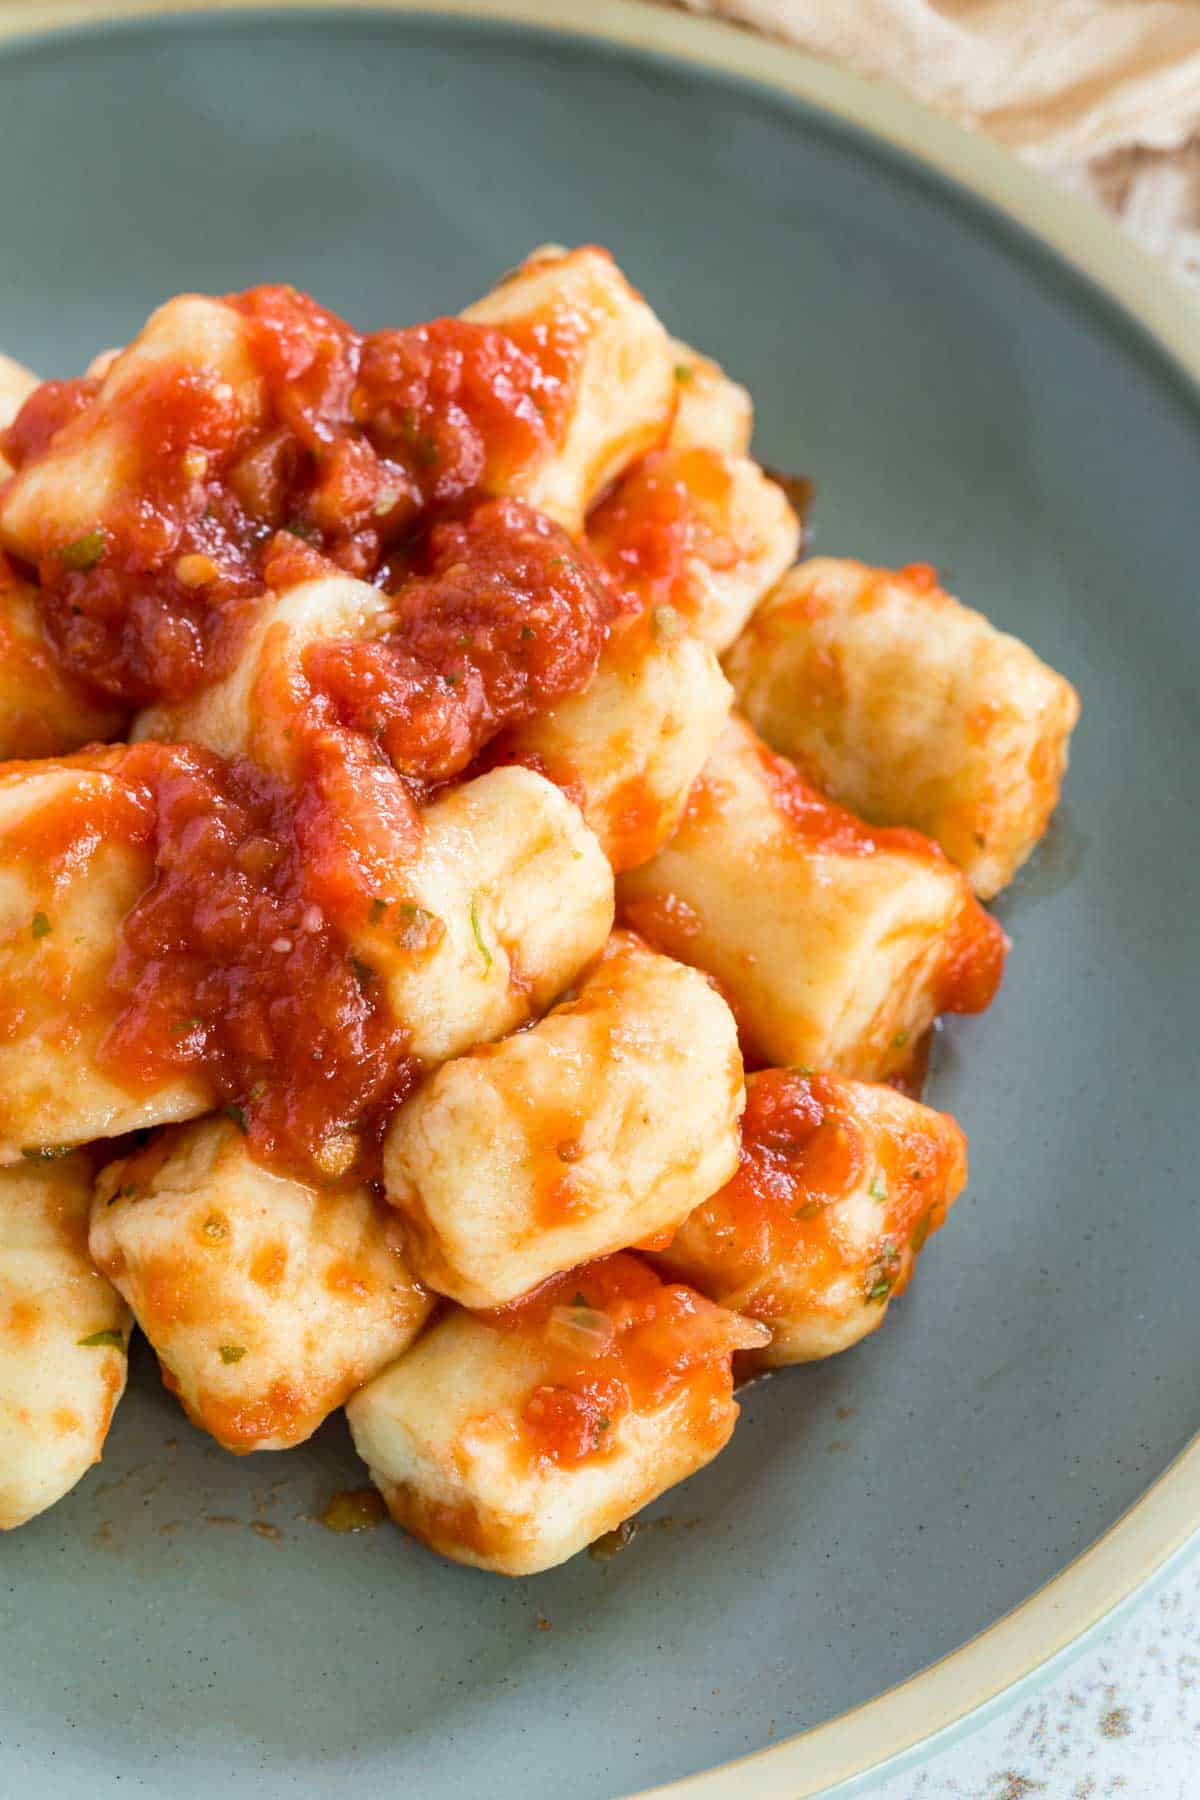 Gnocchi in tomato sauce on a plate.